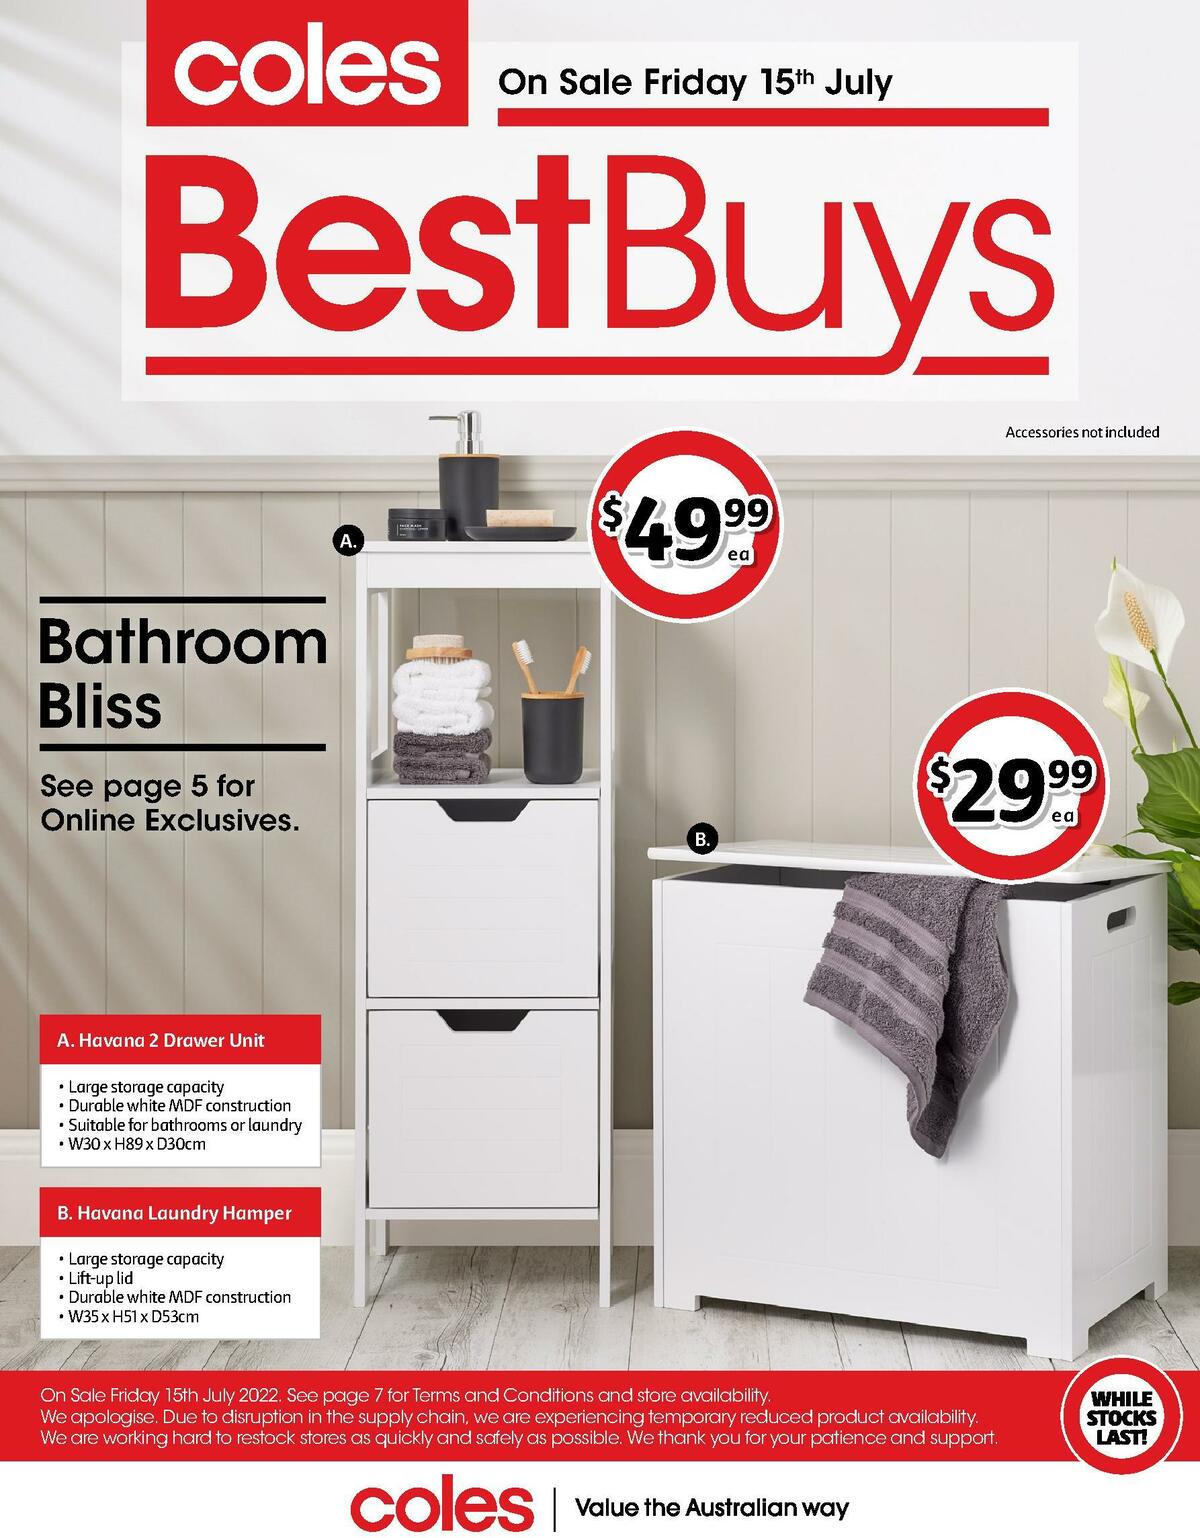 Coles Best Buys - Bathroom Bliss Catalogues from 15 July